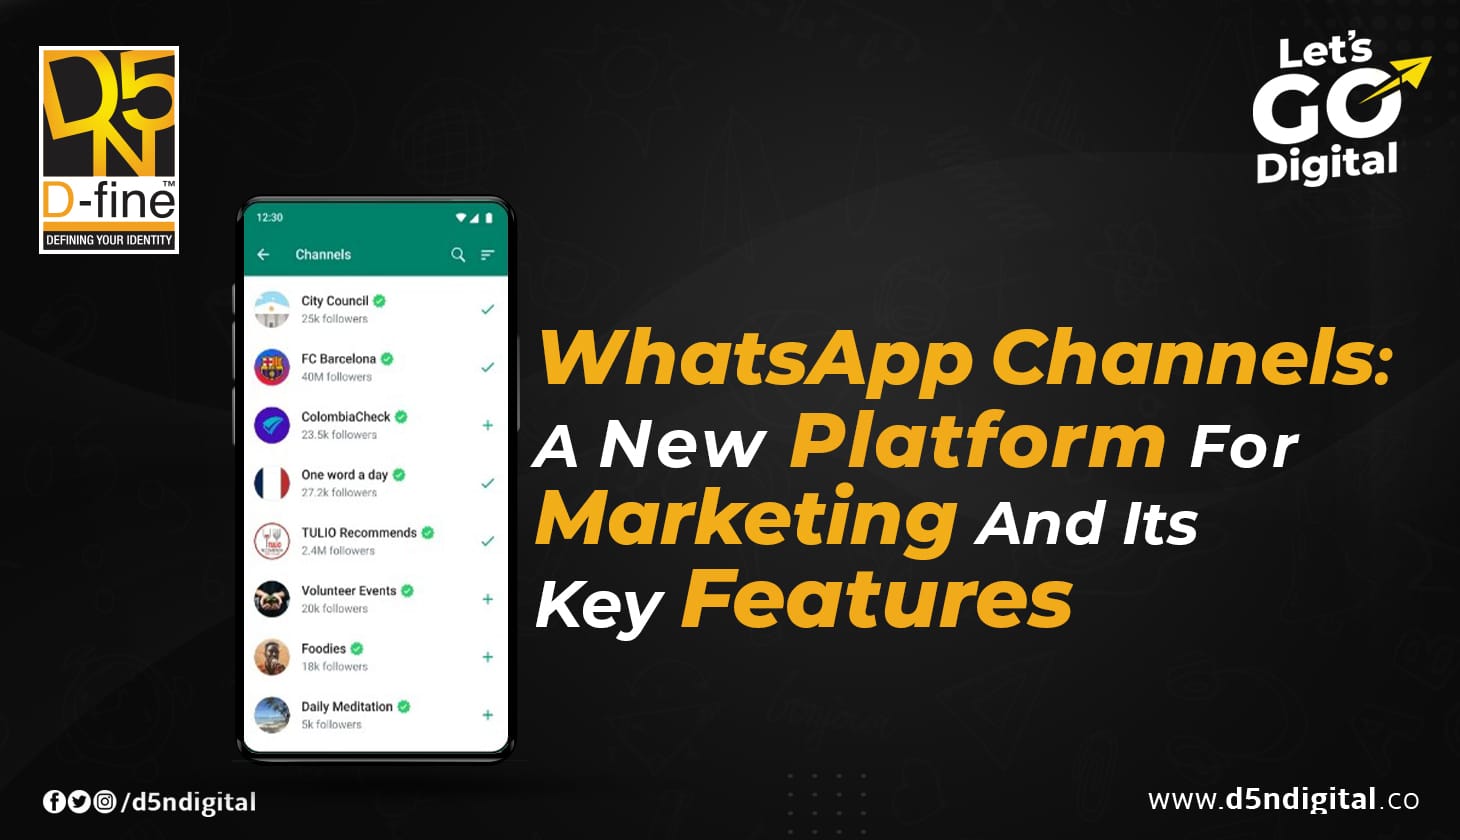 WhatsApp Channels: A New Platform For Marketing And Its Key Features.